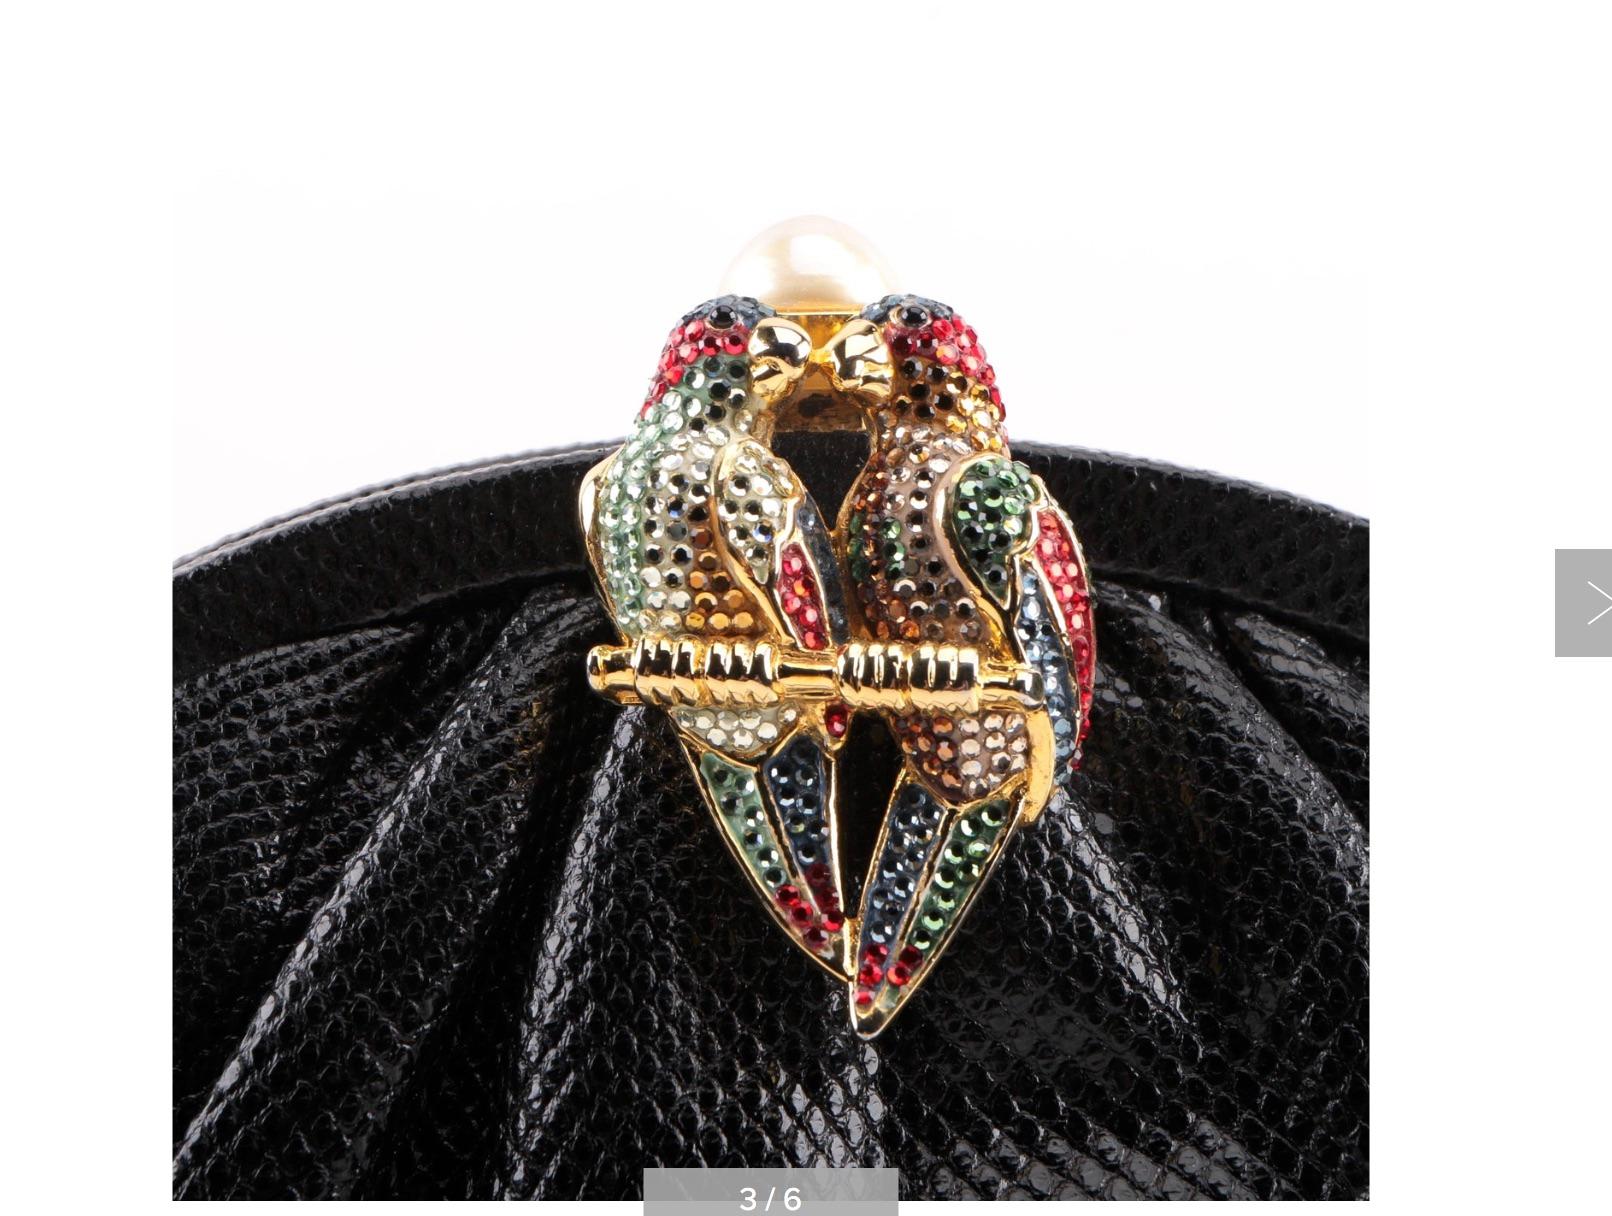 A Judith Leiber New York Elegant black karung skin Clutch Handbag. The bag has a clasp designed with two kissing parrots embellished with handset colorful Swarovski crystals and a large pearl on the gold clasp.
The purse opens to a satin lining with